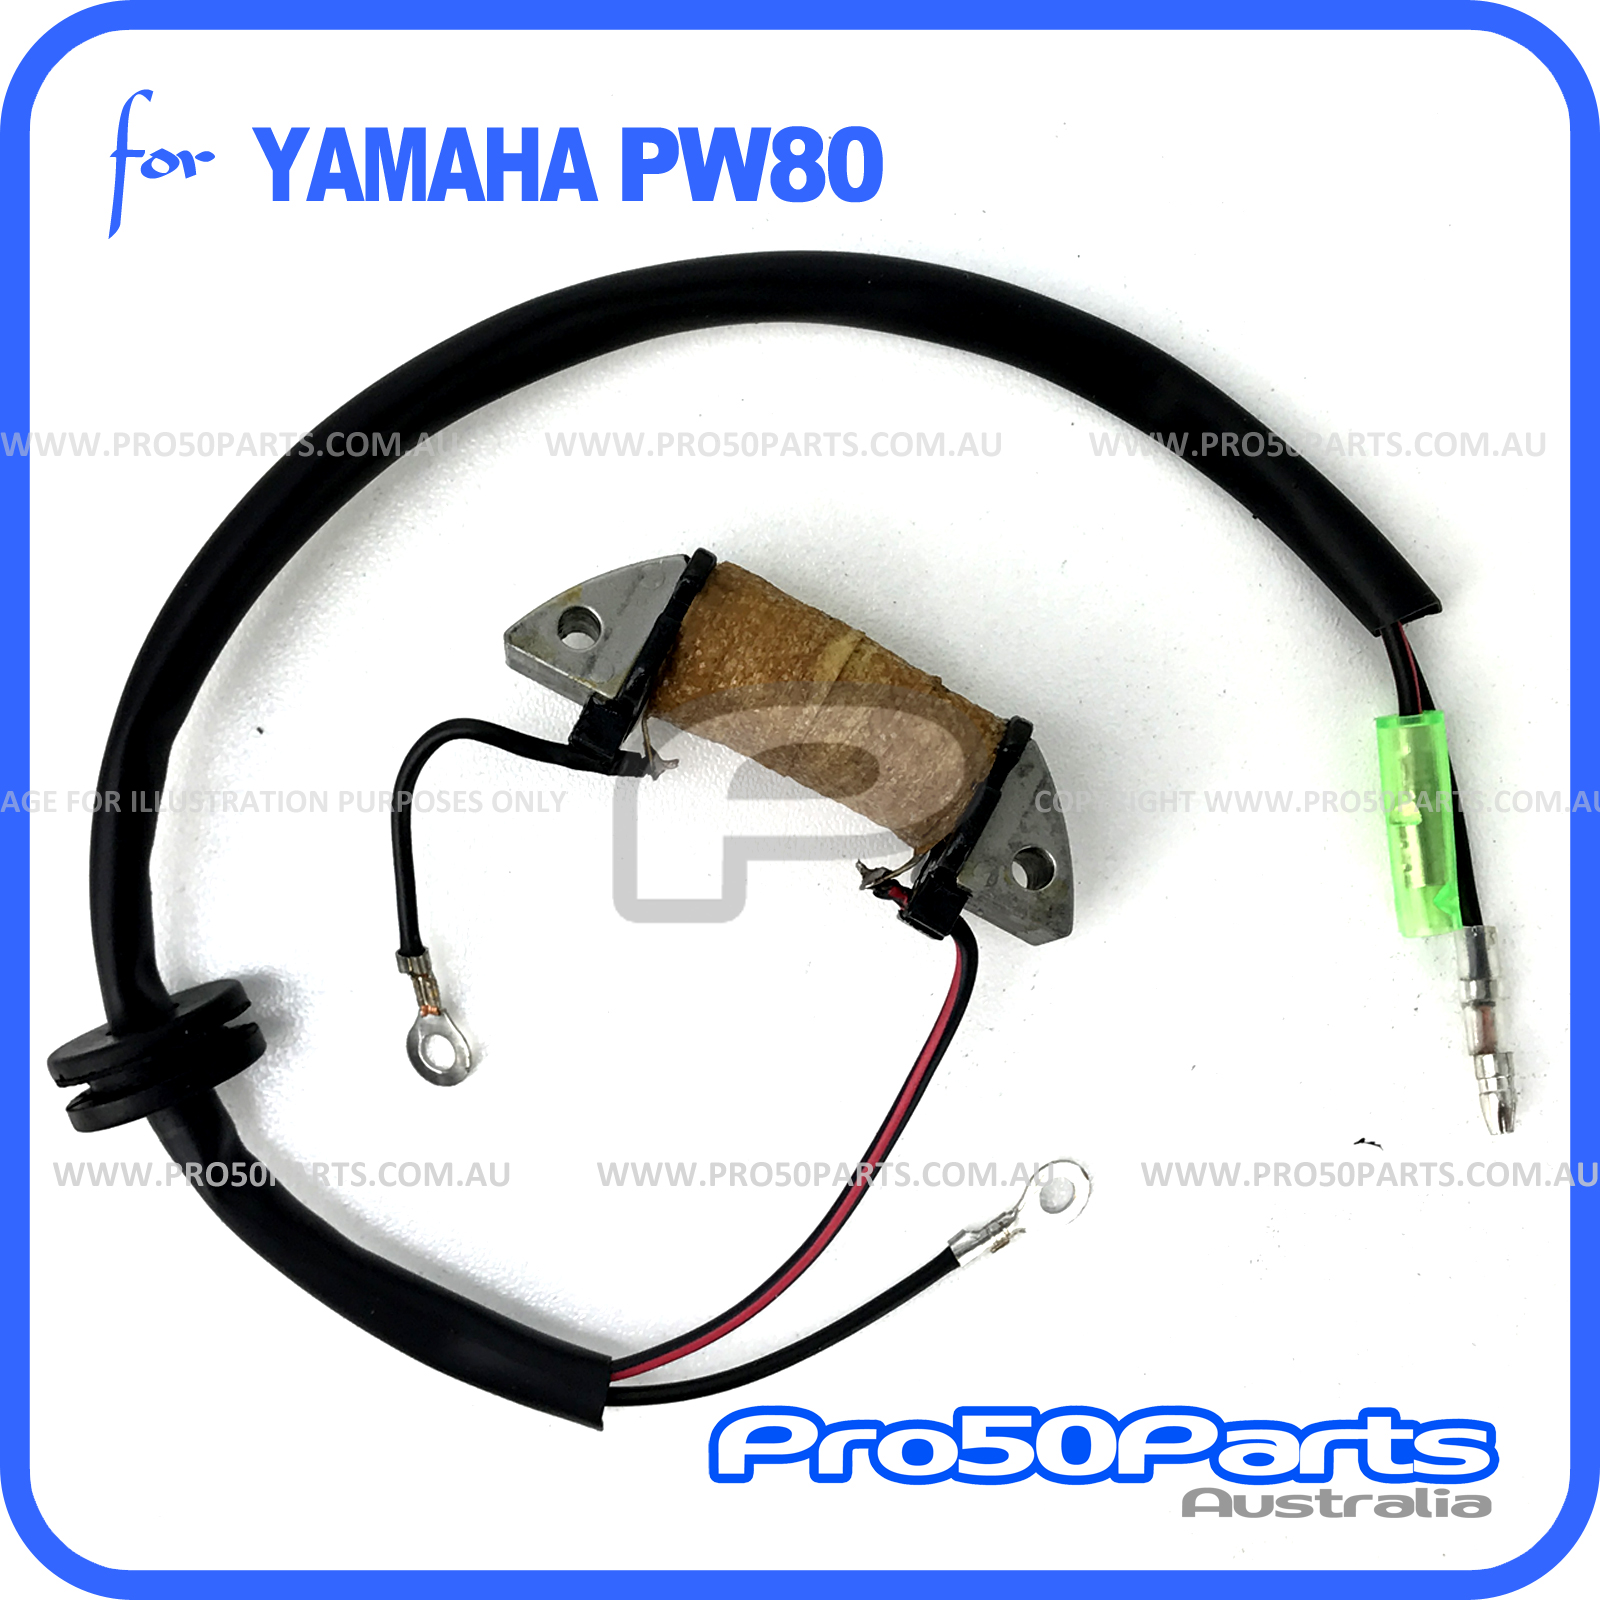 YAMAHA PW80 PW 80 IGNITION COIL PLUG ASSEMBLY NEW V CO10 